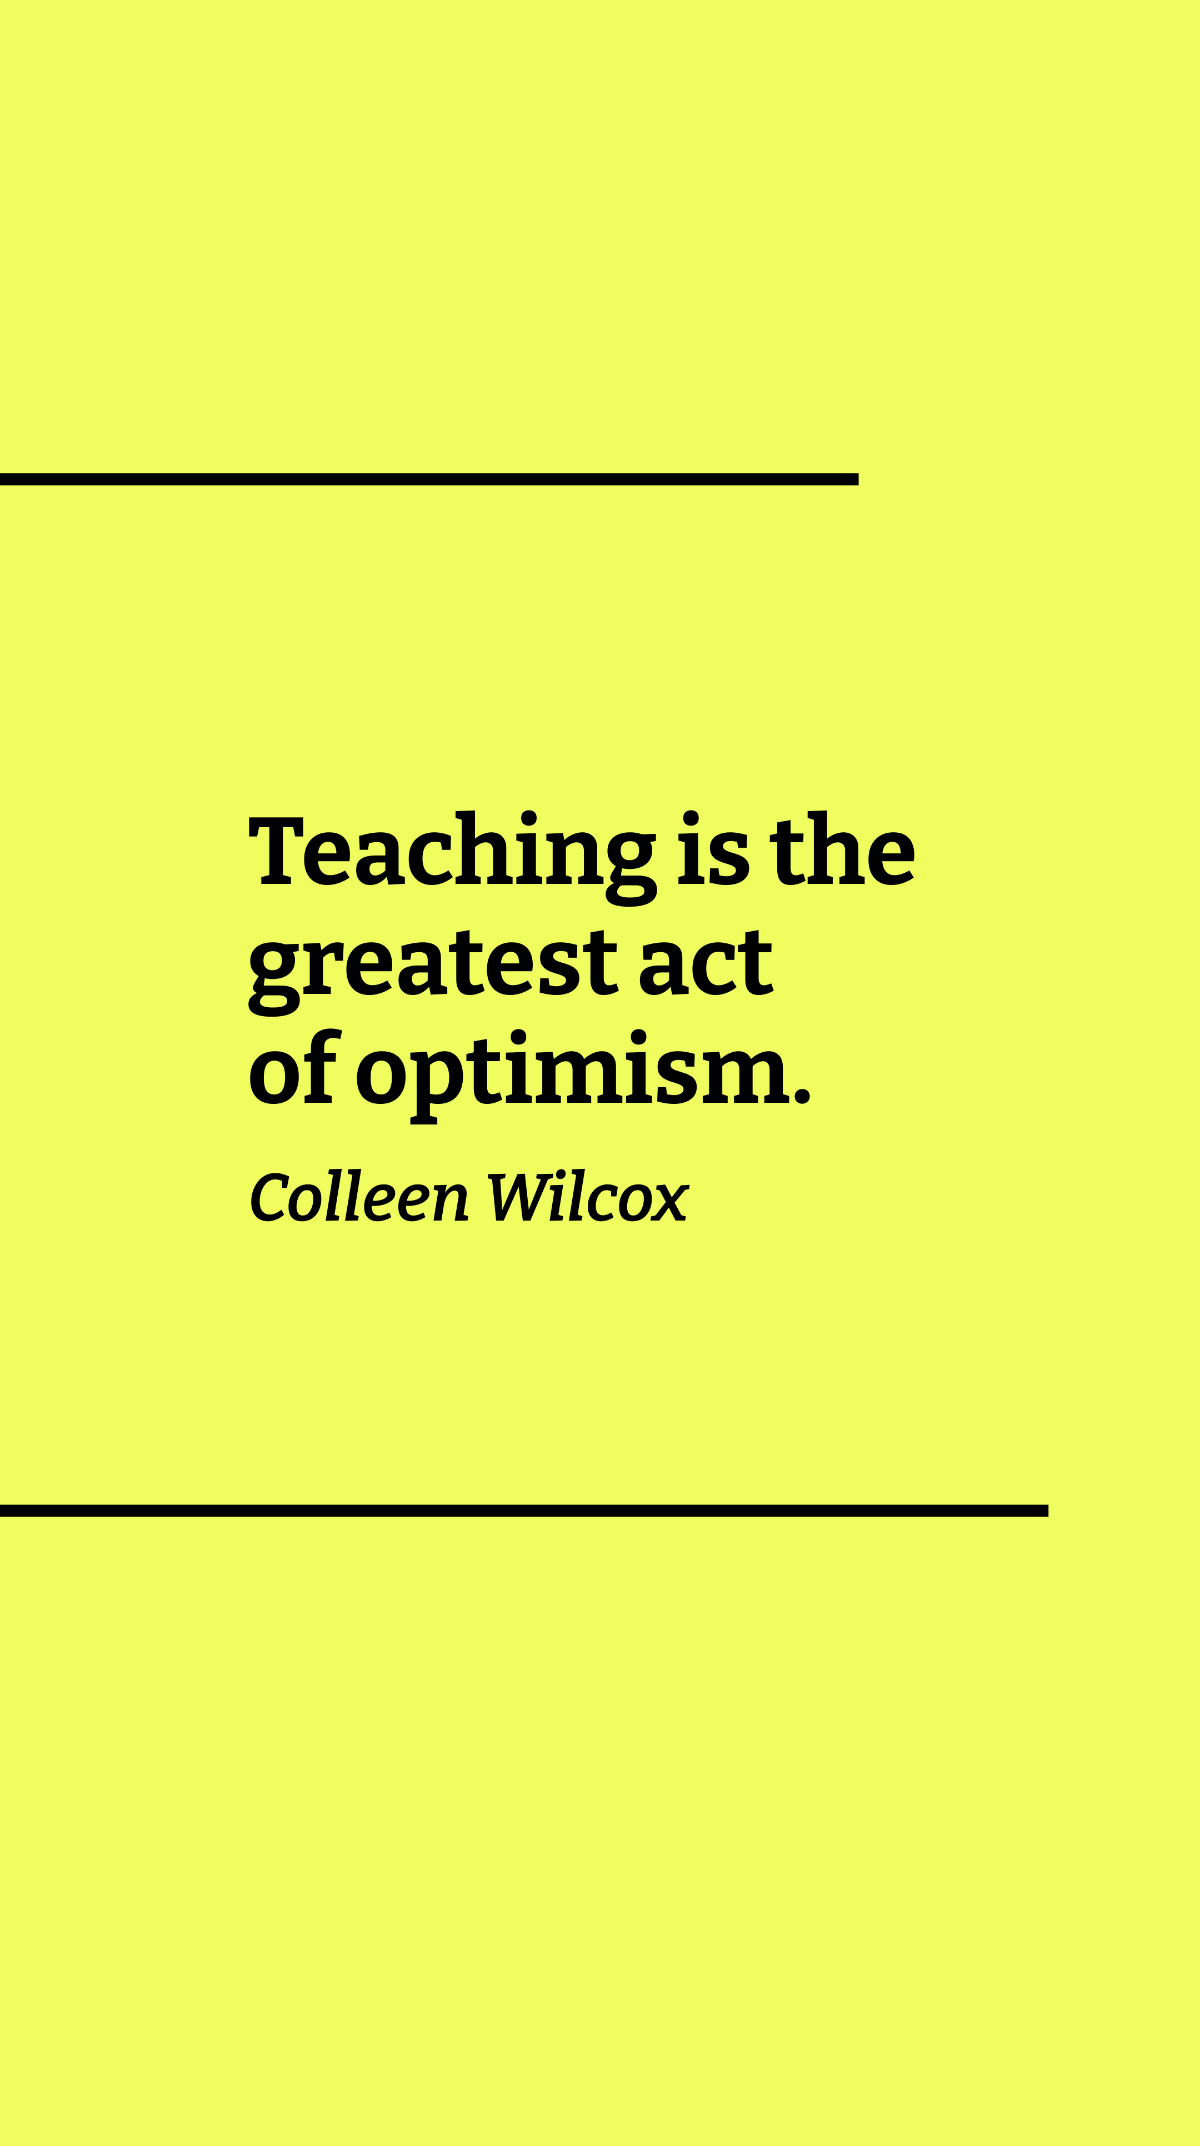 Colleen Wilcox - Teaching is the greatest act of optimism. Template